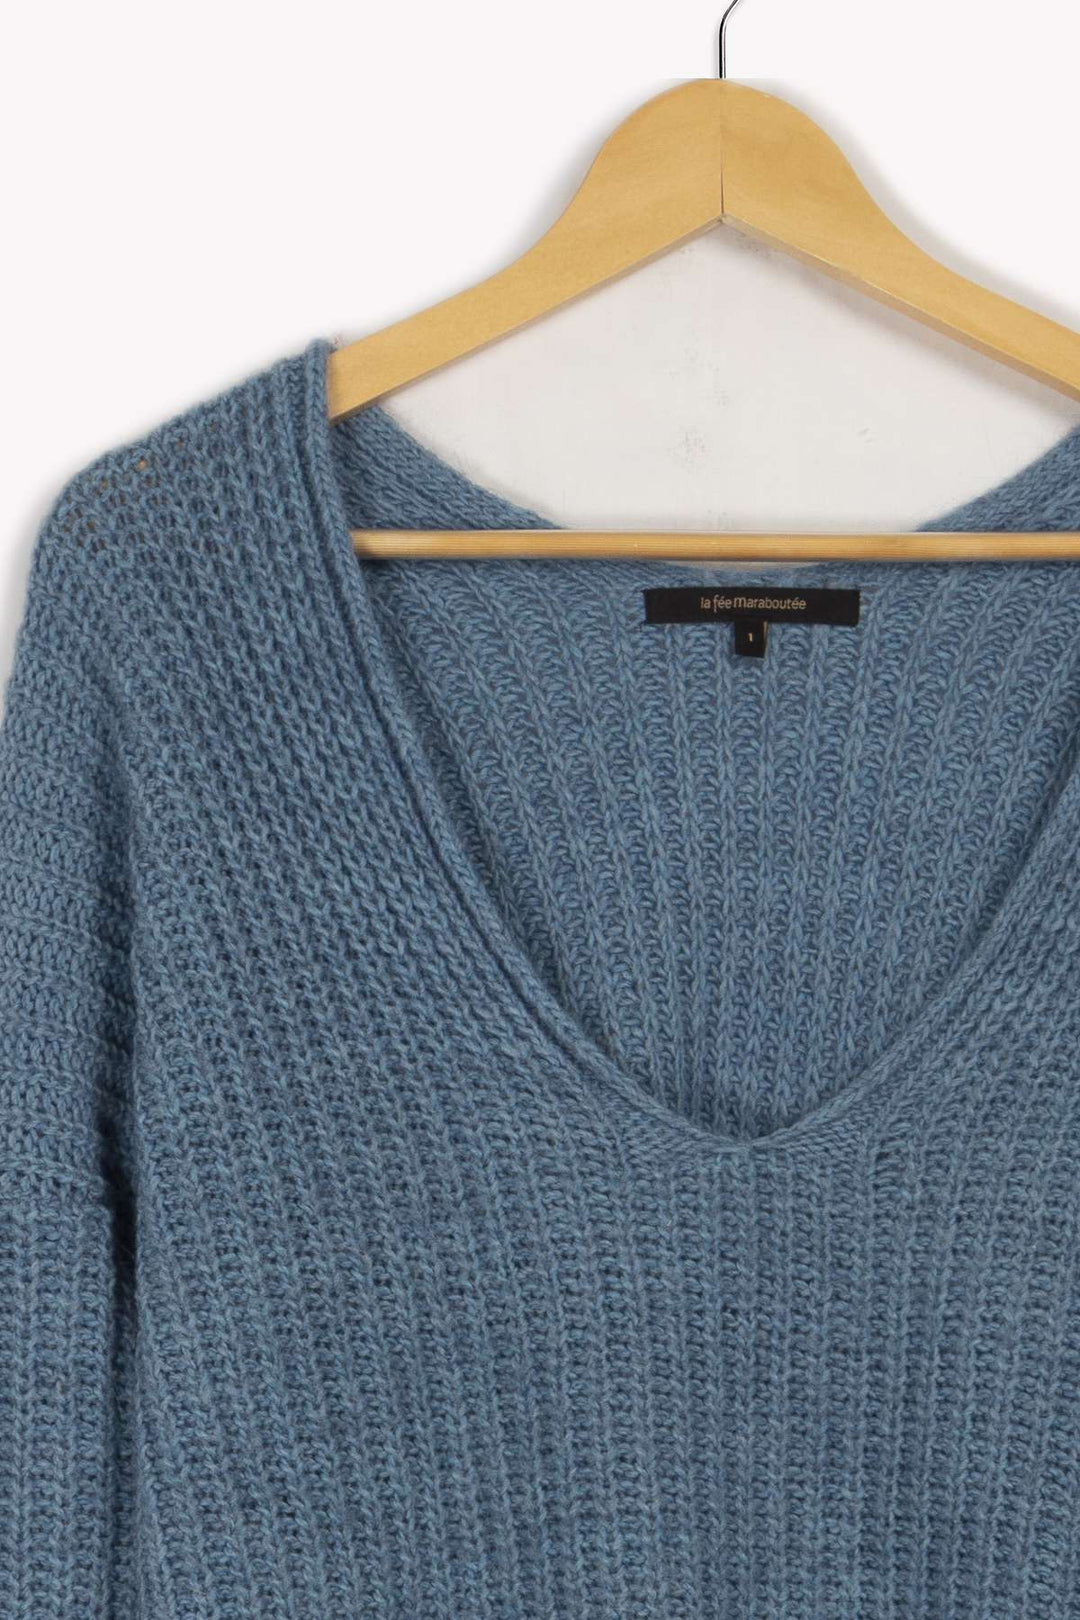 Blue sweater - Size T1